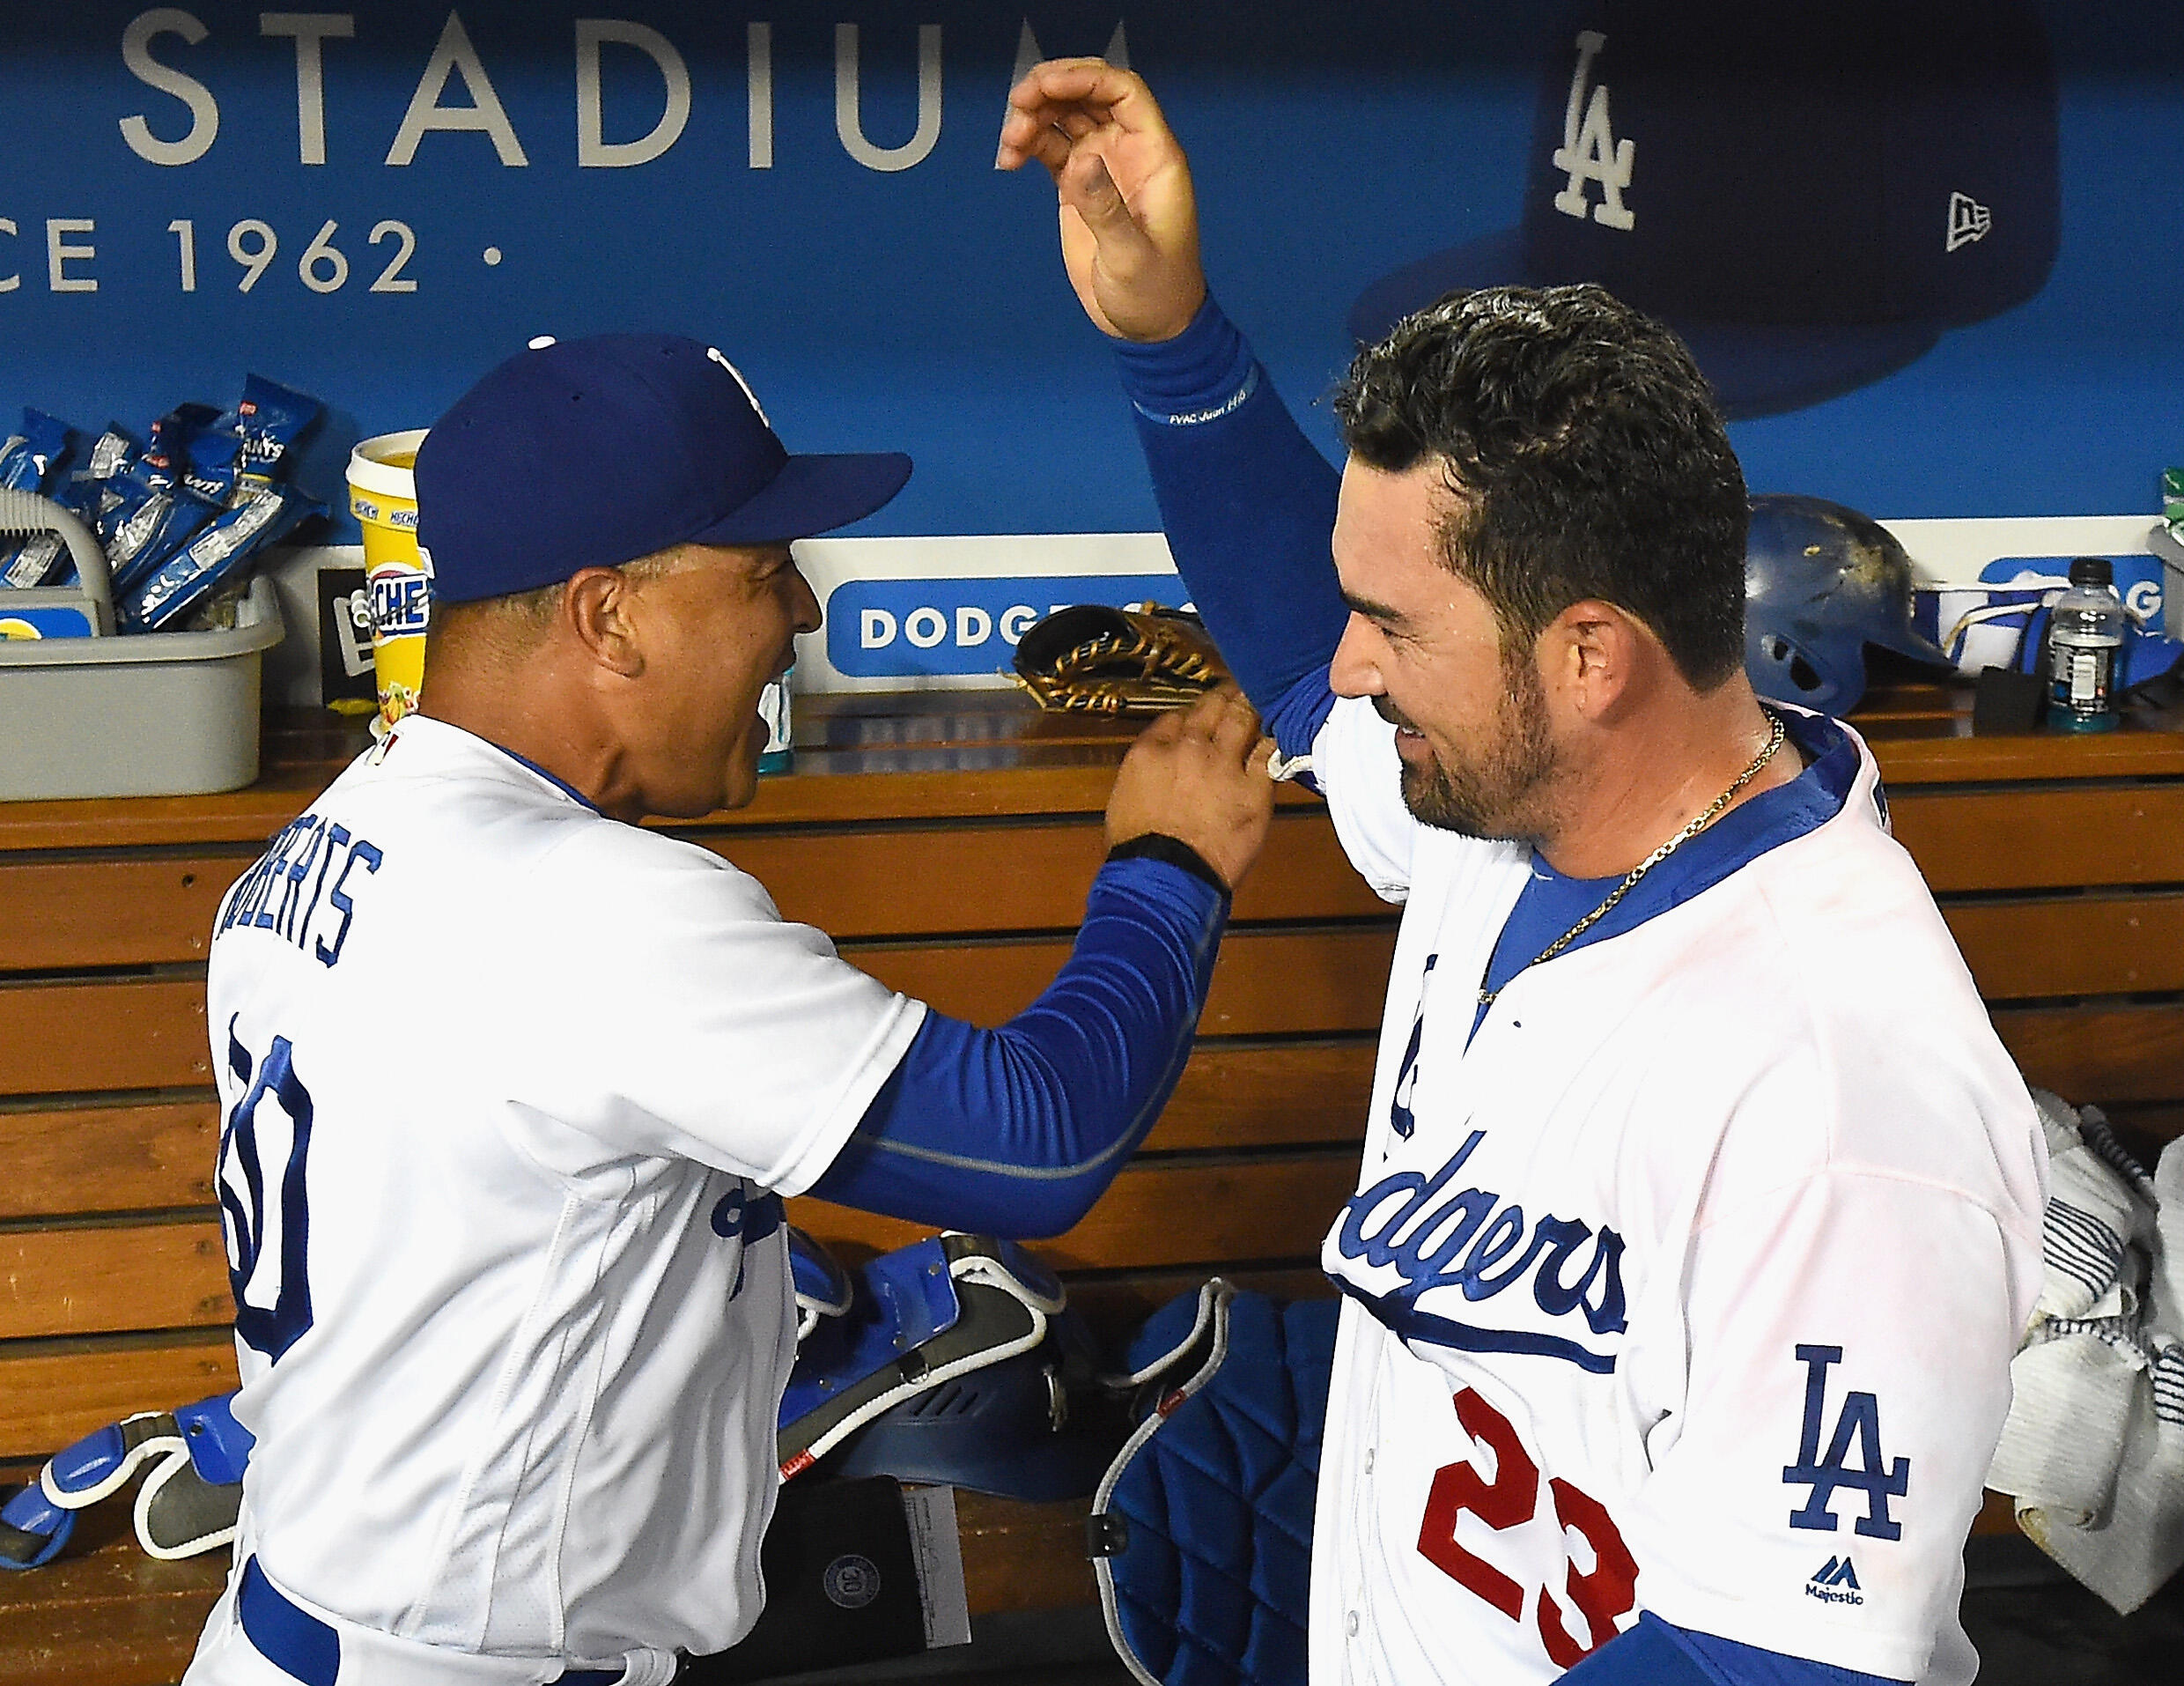 LOS ANGELES, CA - SEPTEMBER 19:  Adrian Gonzalez #23 gets a high five from manager Dave Roberts #30 after he hit a walk off double that scored the winning run in the ninth inning of the game against the San Francisco Giants at Dodger Stadium on September 